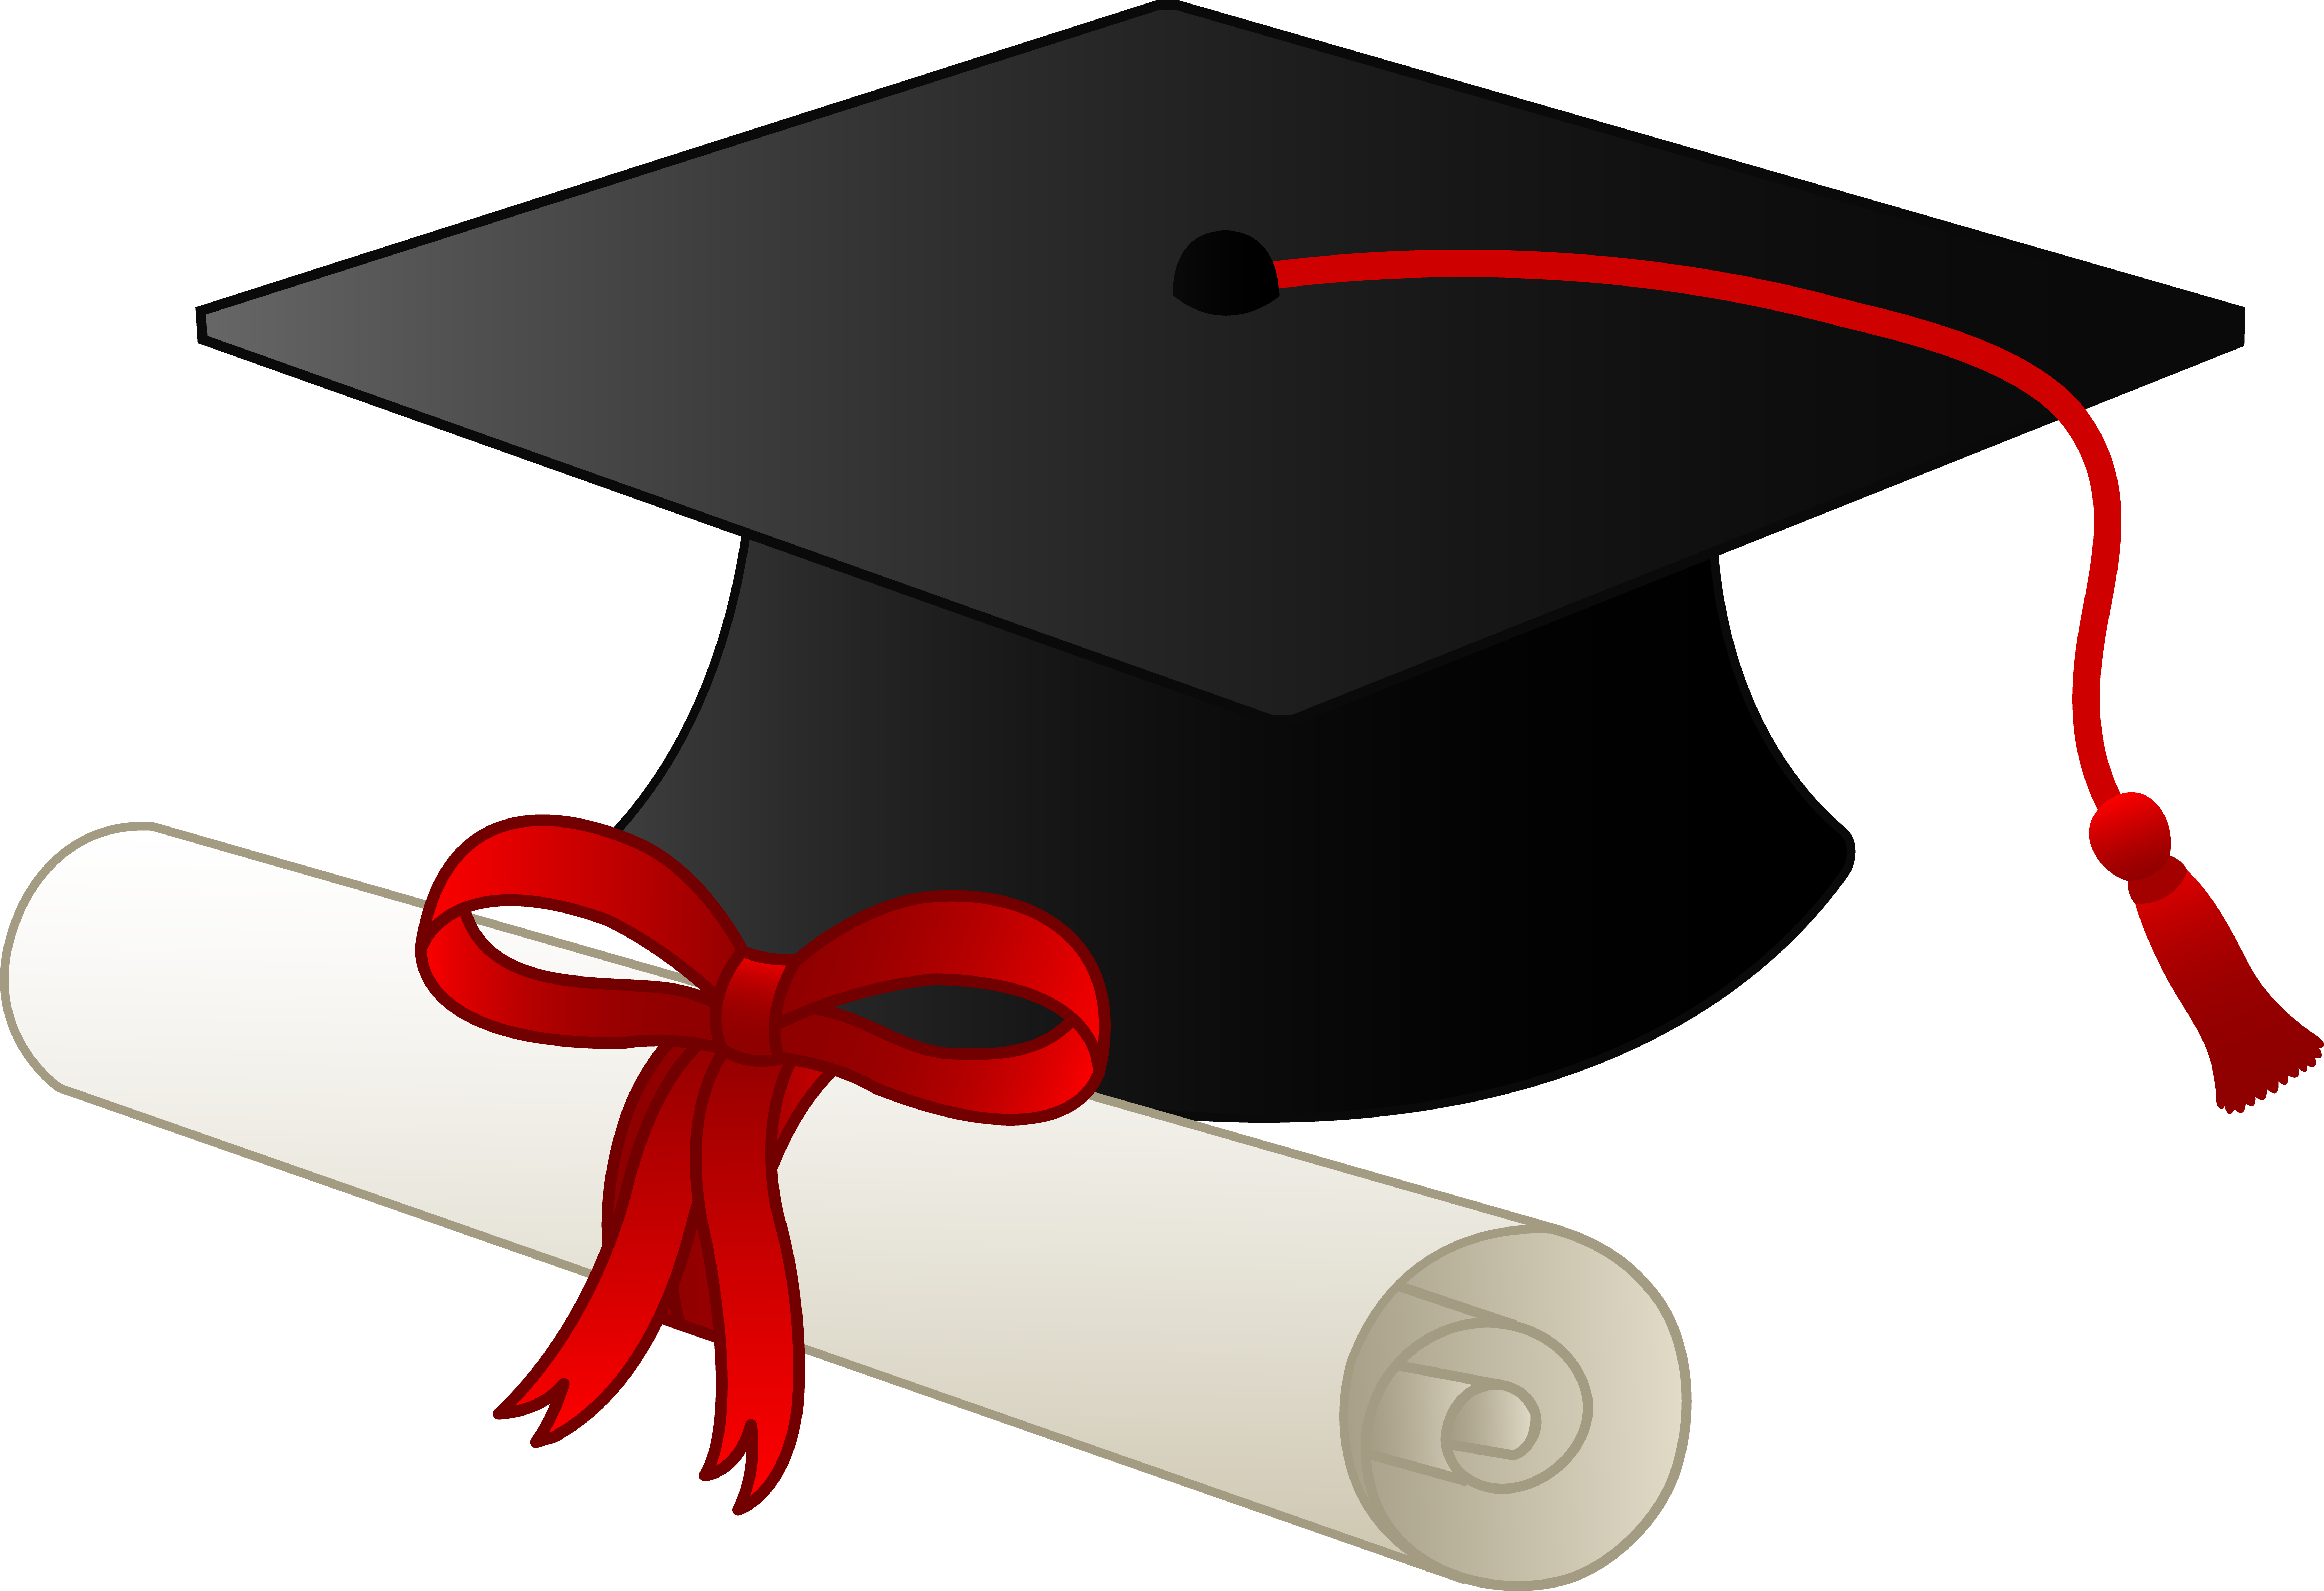 Pictures Of Caps And Gowns - ClipArt Best